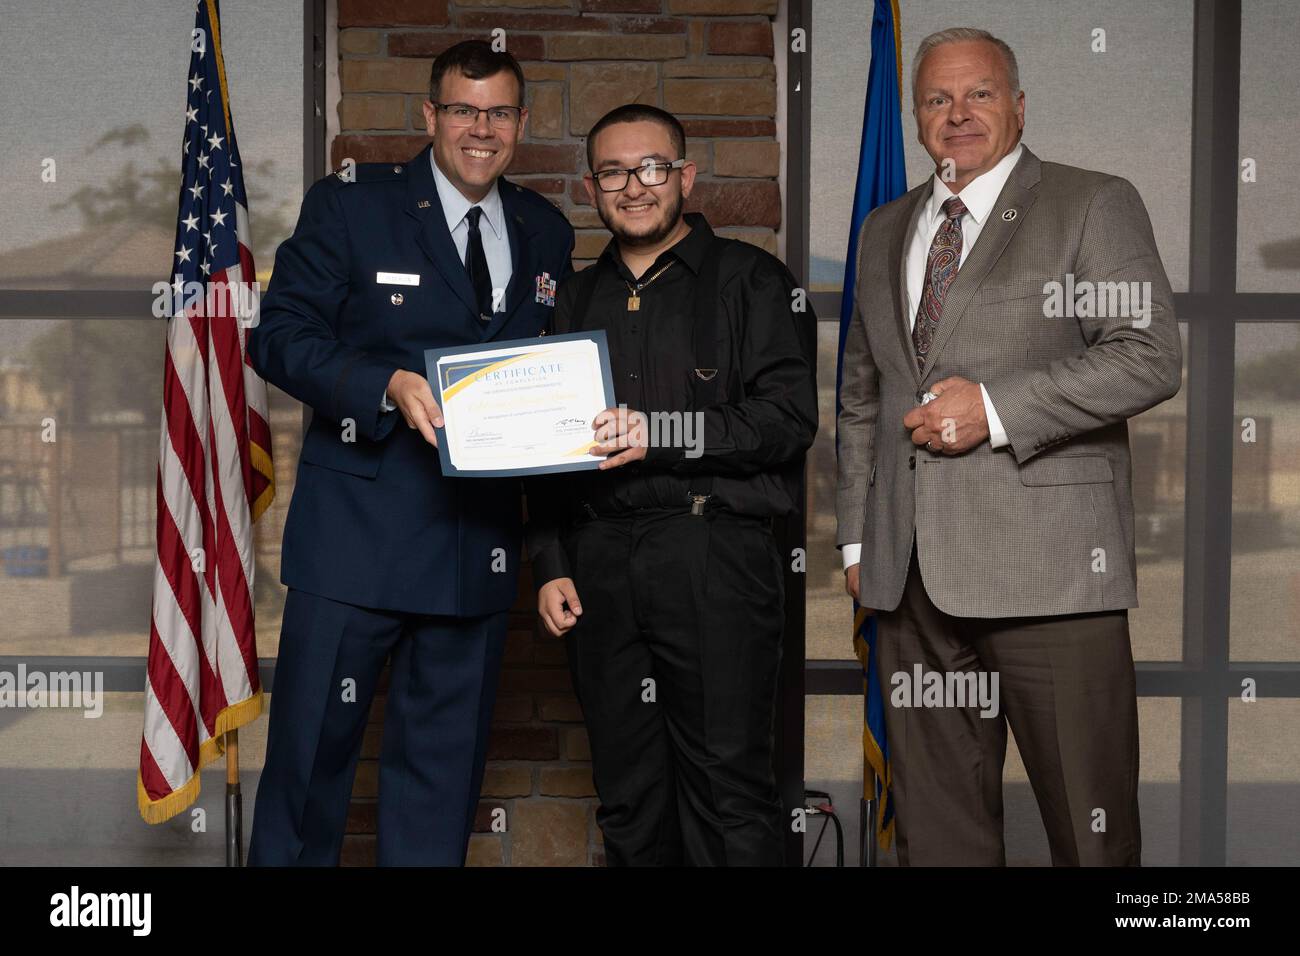 Adrian Alonson-Roman, Project SEARCH intern, receives graduation certificate, May 24, 2022, on Holloman Air Force Base, New Mexico. Project SEARCH is a year-long internship to help intellectually disabled high school graduates develop job skills. Stock Photo